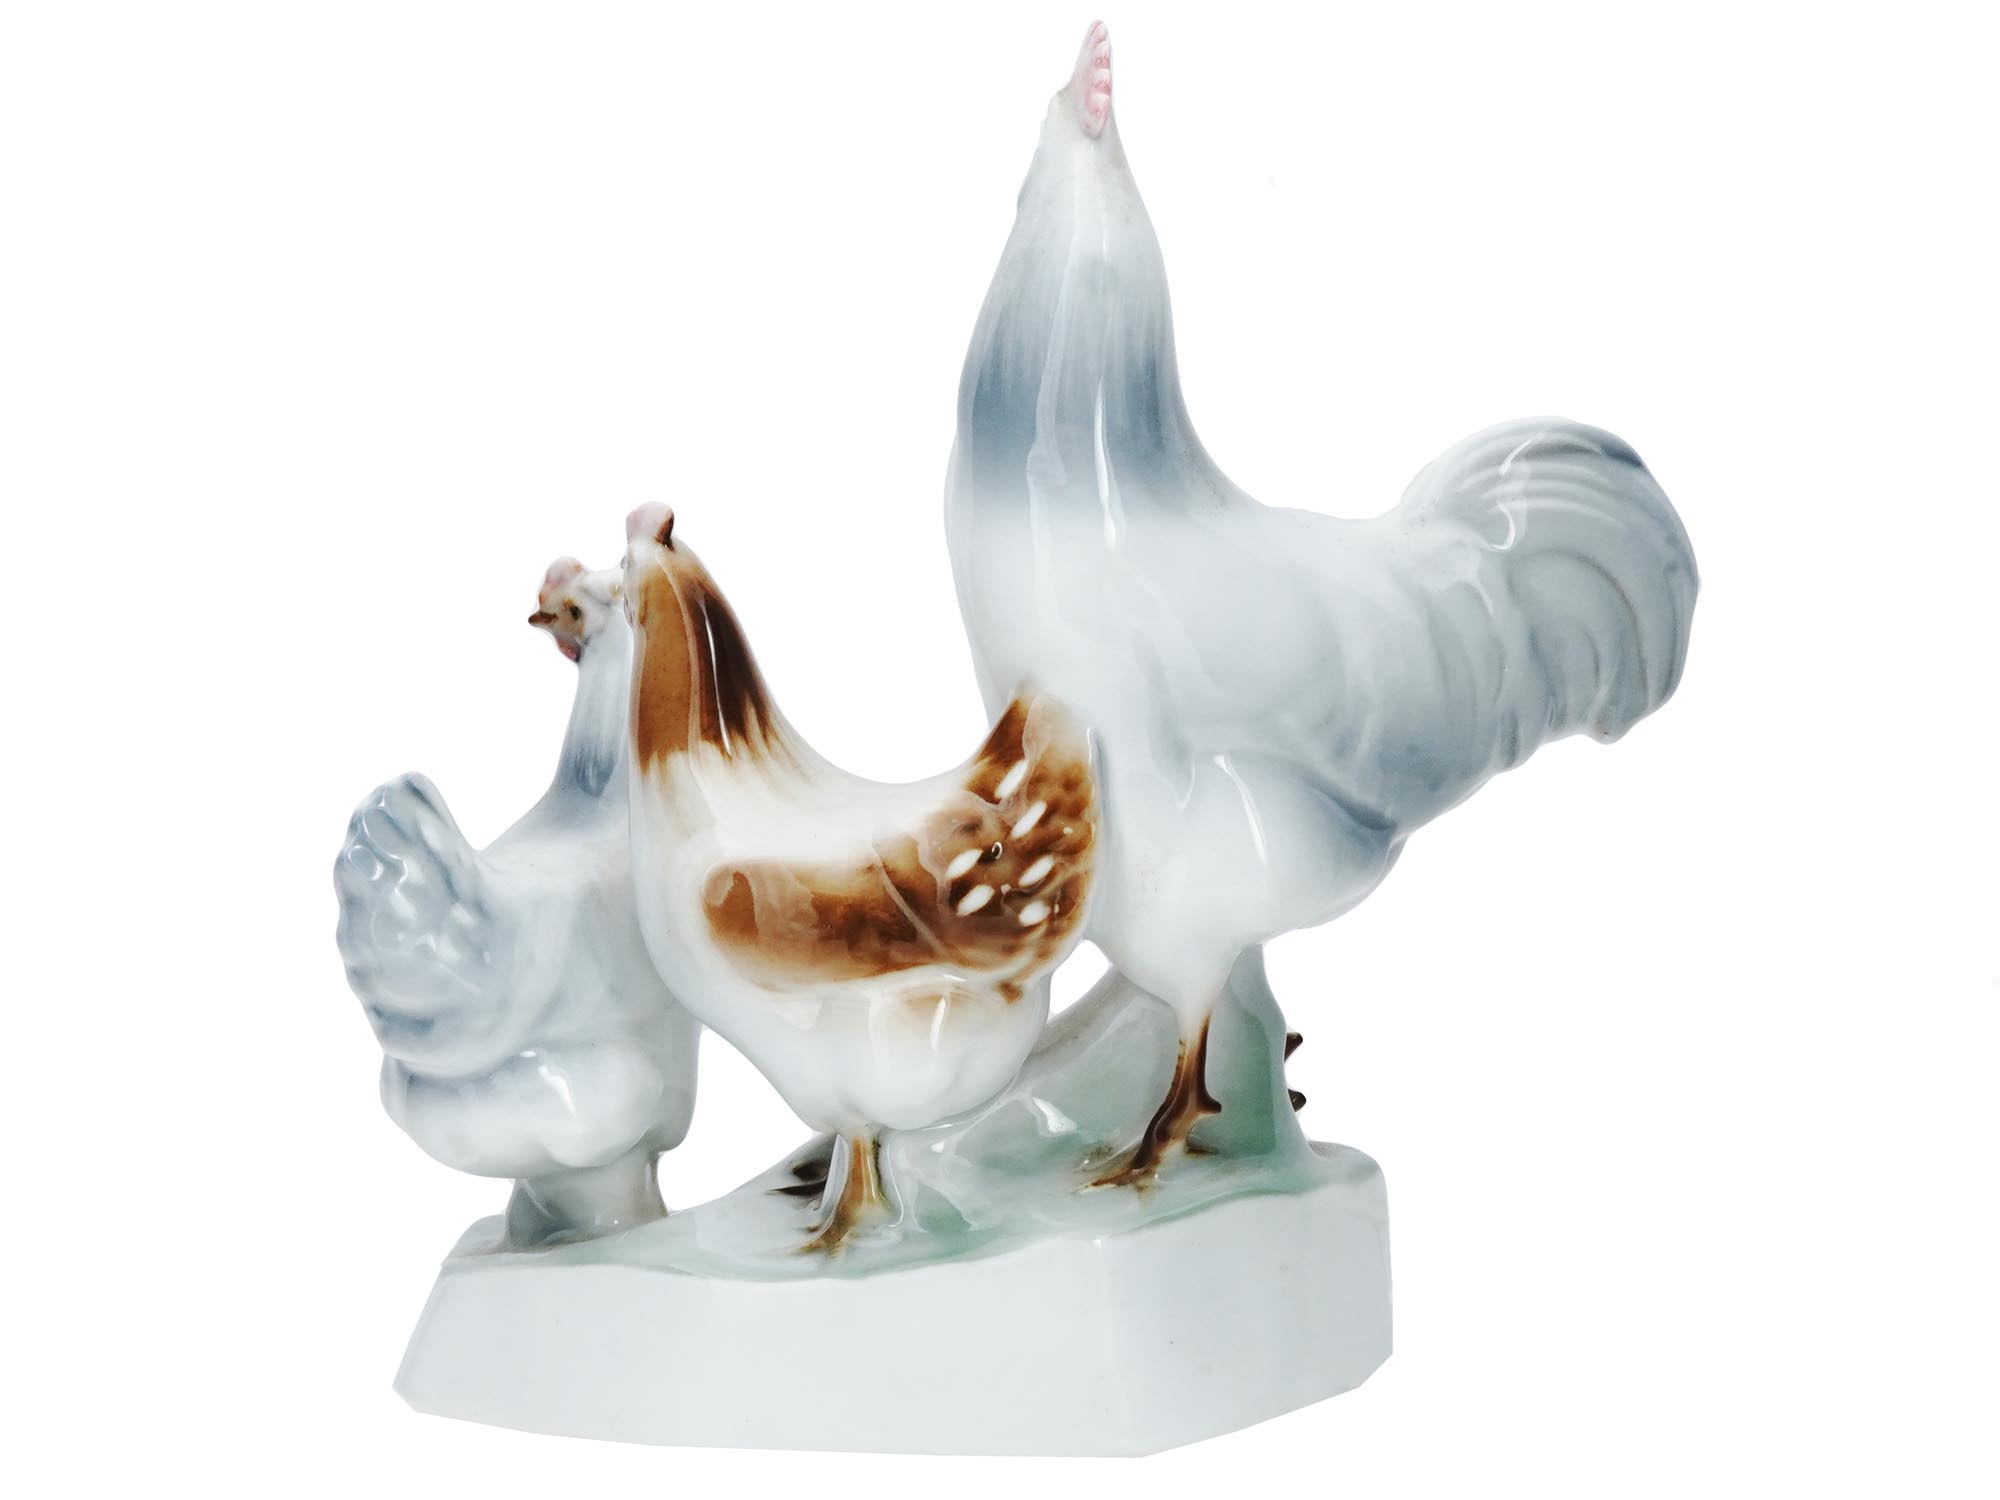 HUNGARIAN ZSOLNAY GLAZED PORCELAIN CHICKEN FIGURE PIC-1